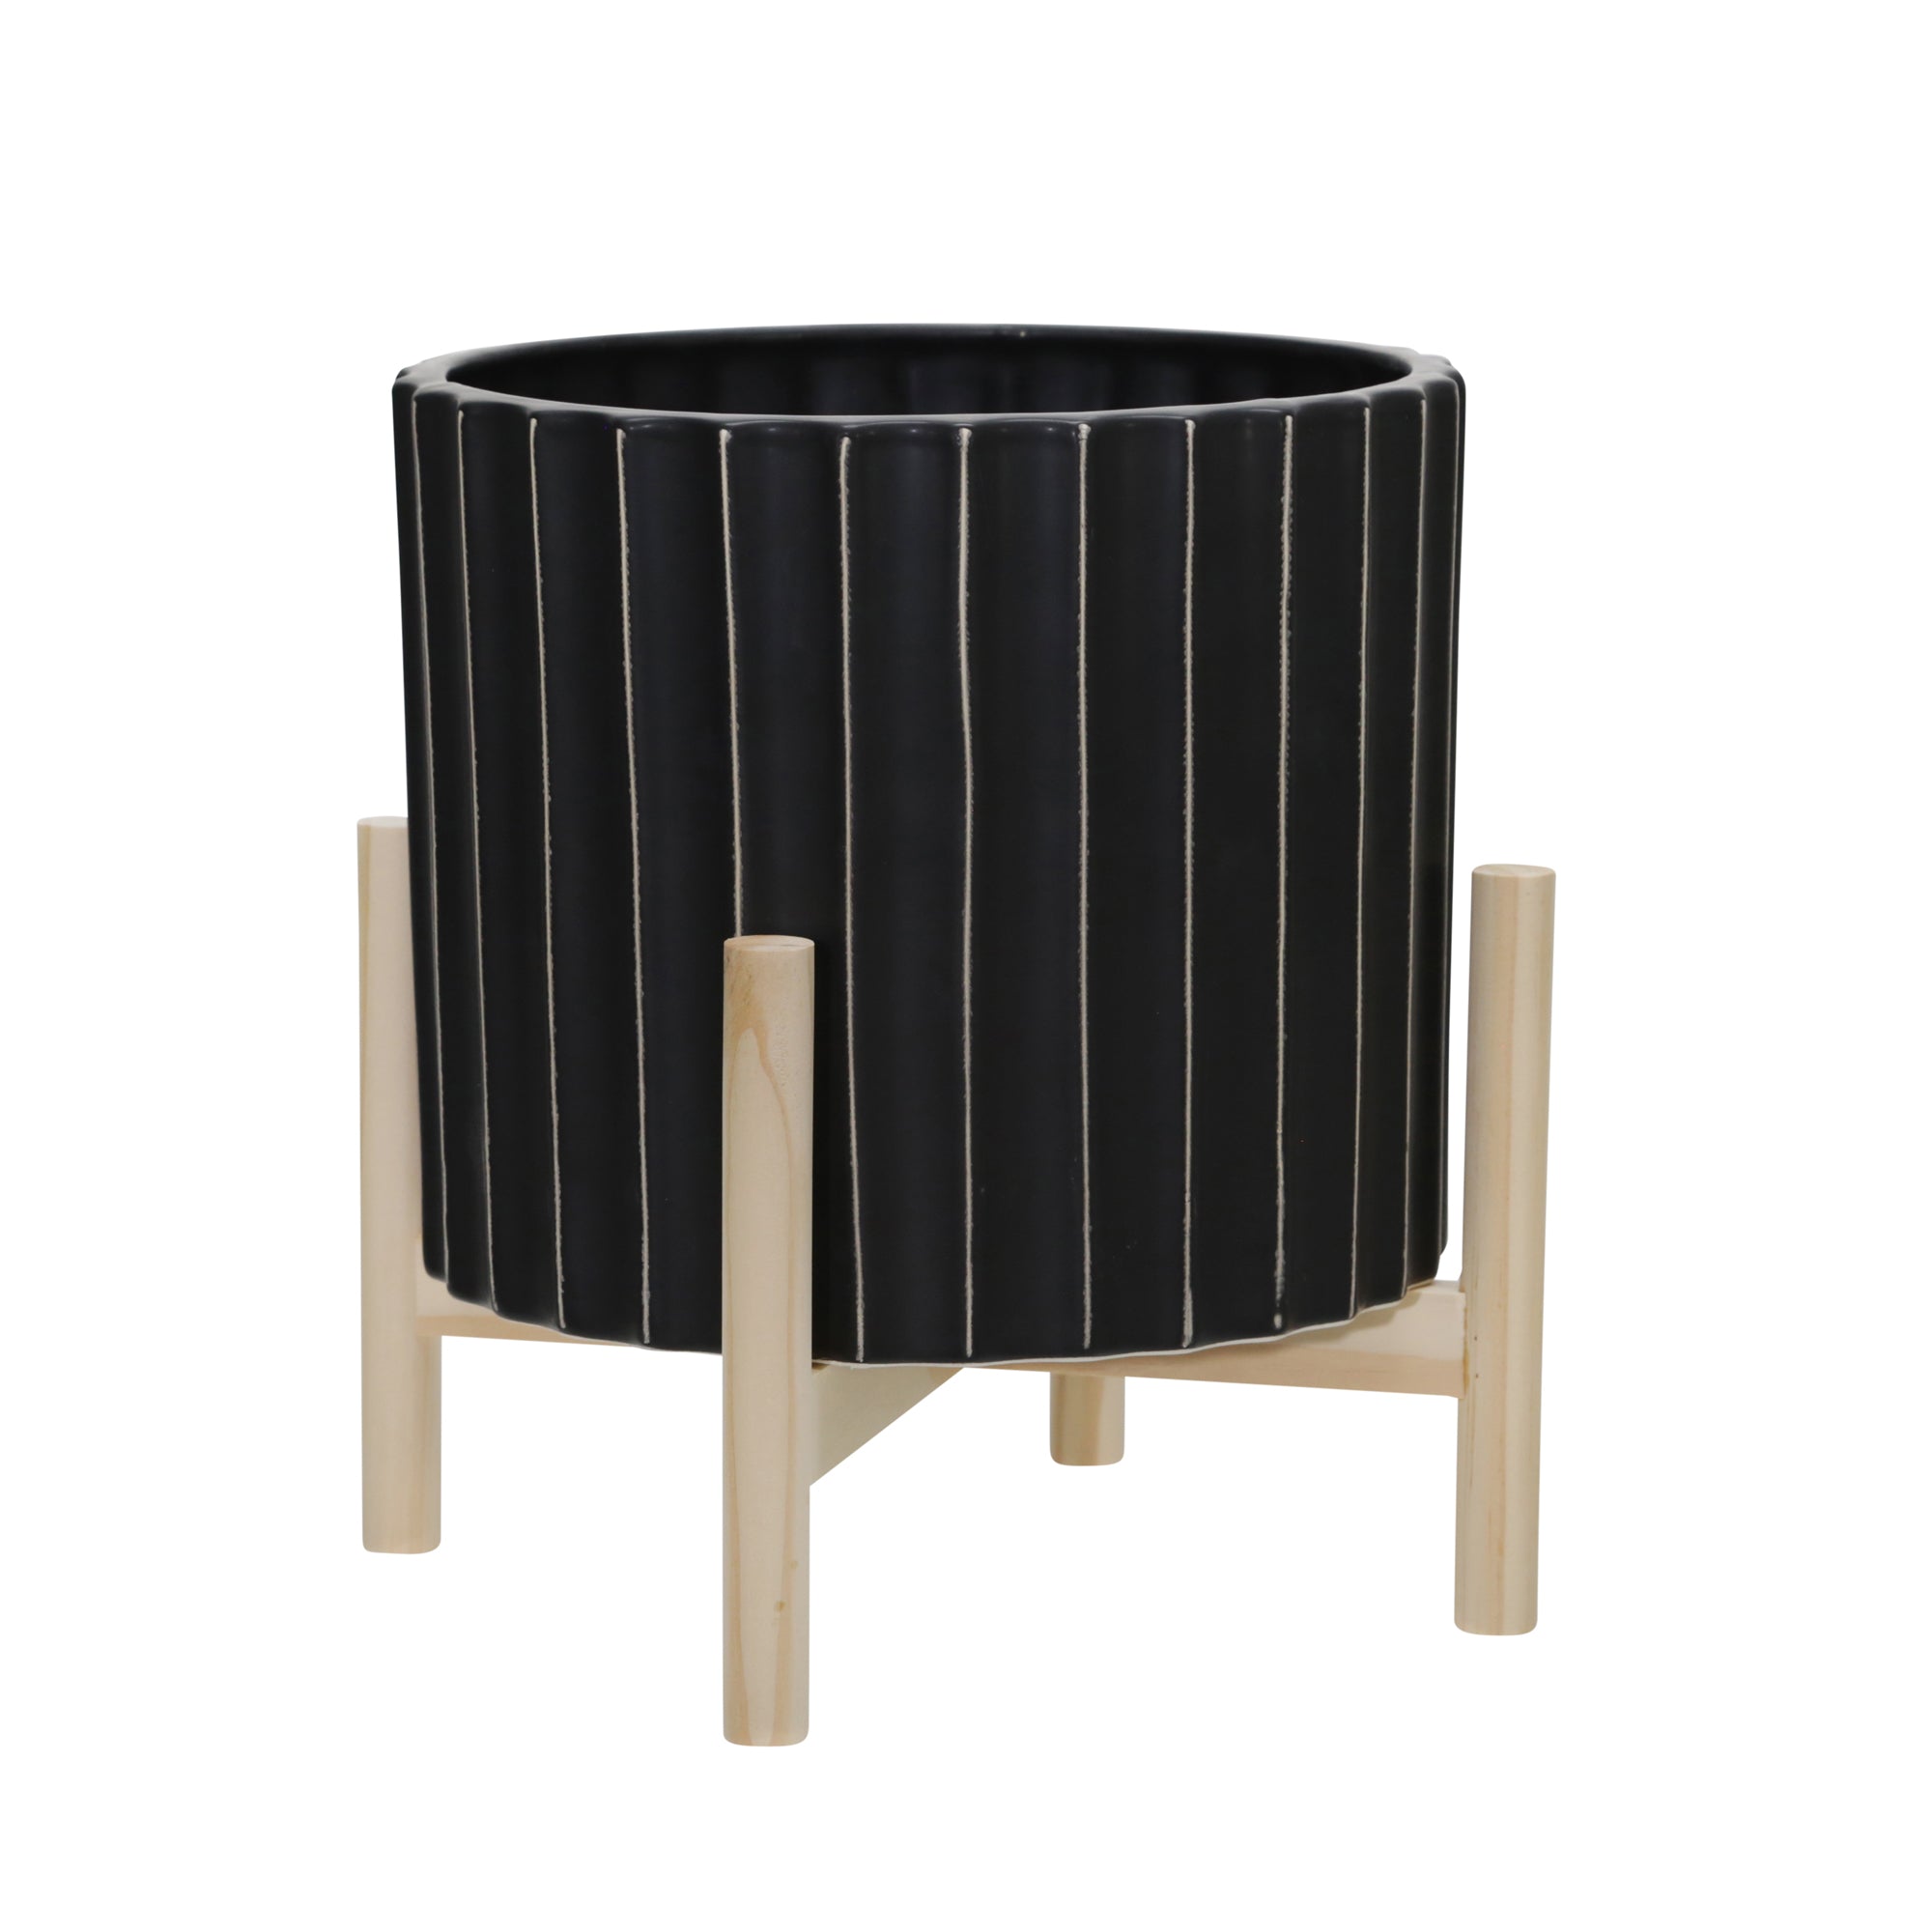 12" Fluted Planter with Wood Stand, Black, Planters